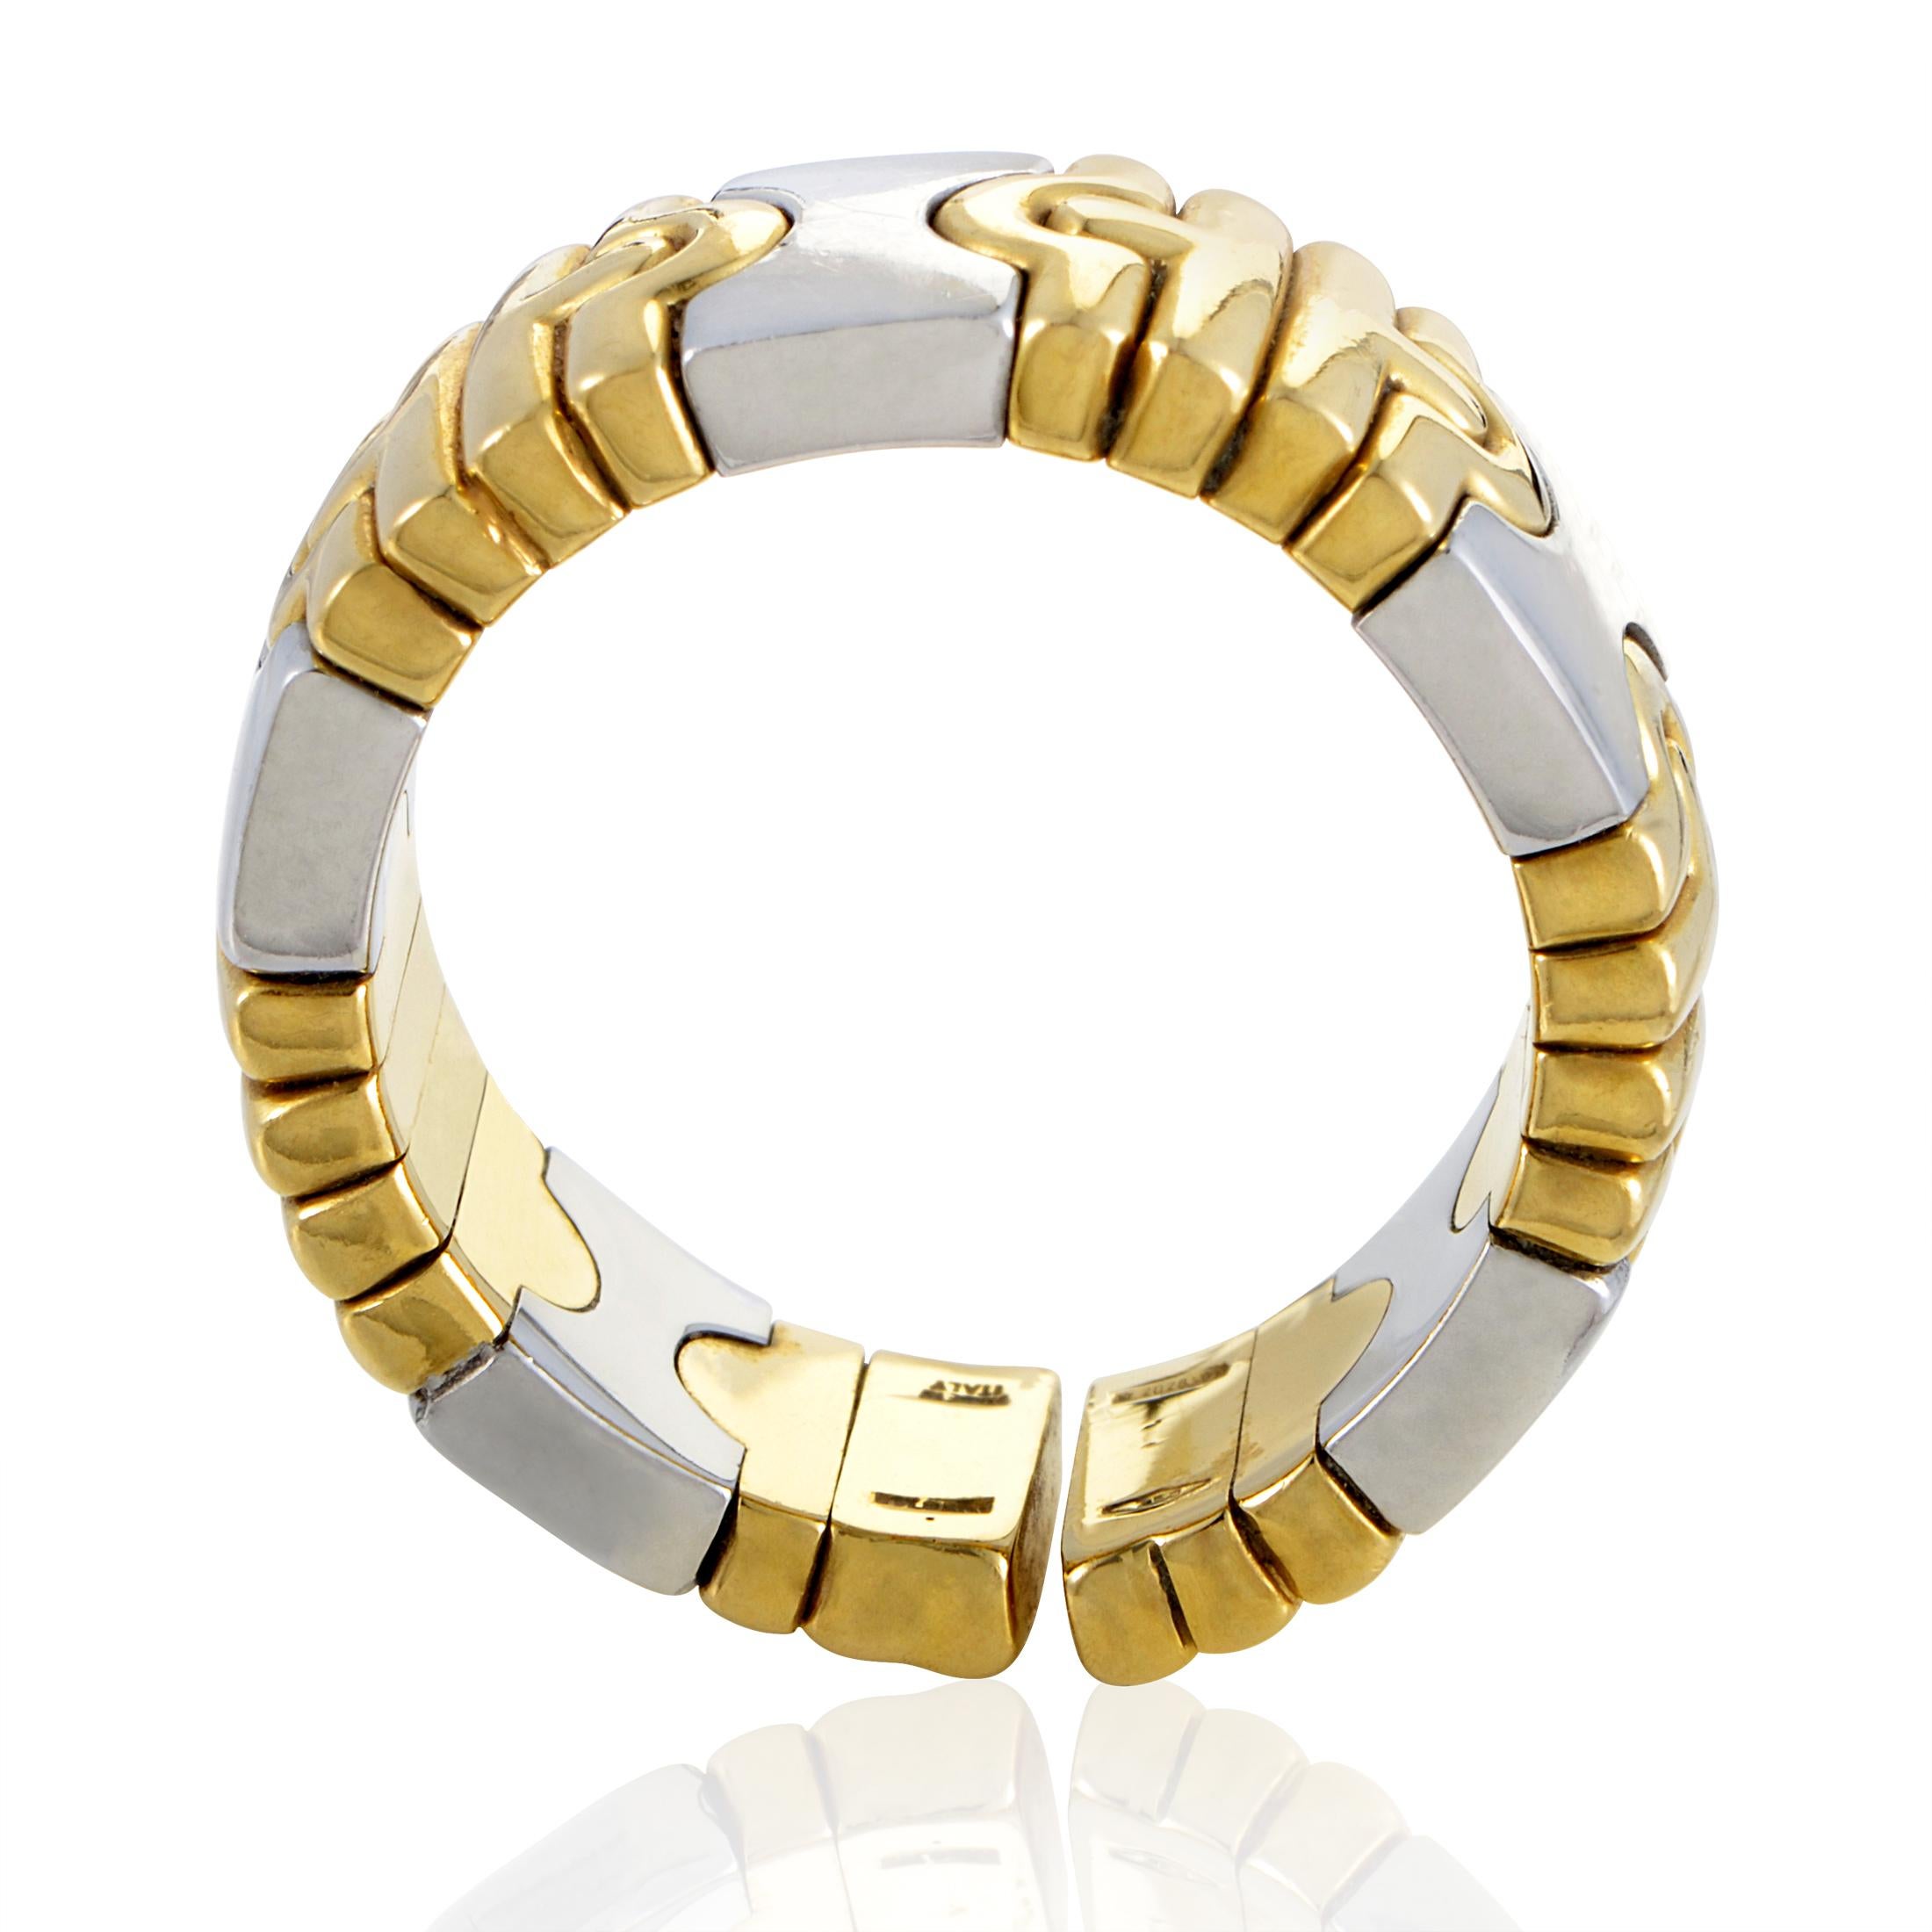 This Bvlgari ring from the 